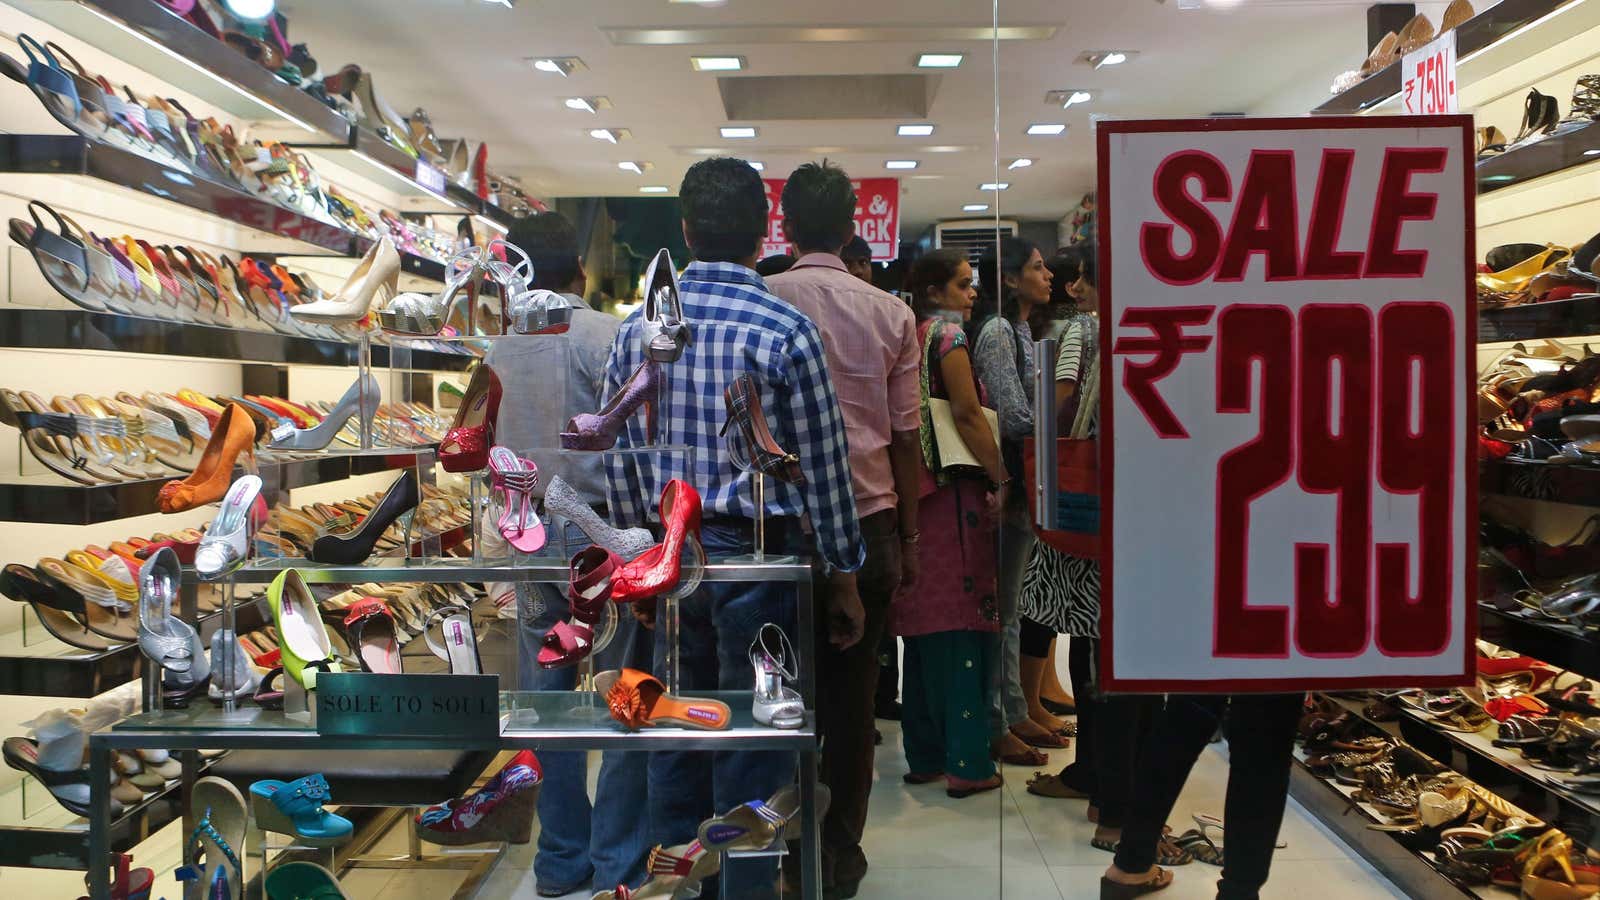 Footwear buyers, though, see some benefit in shopping in sales.